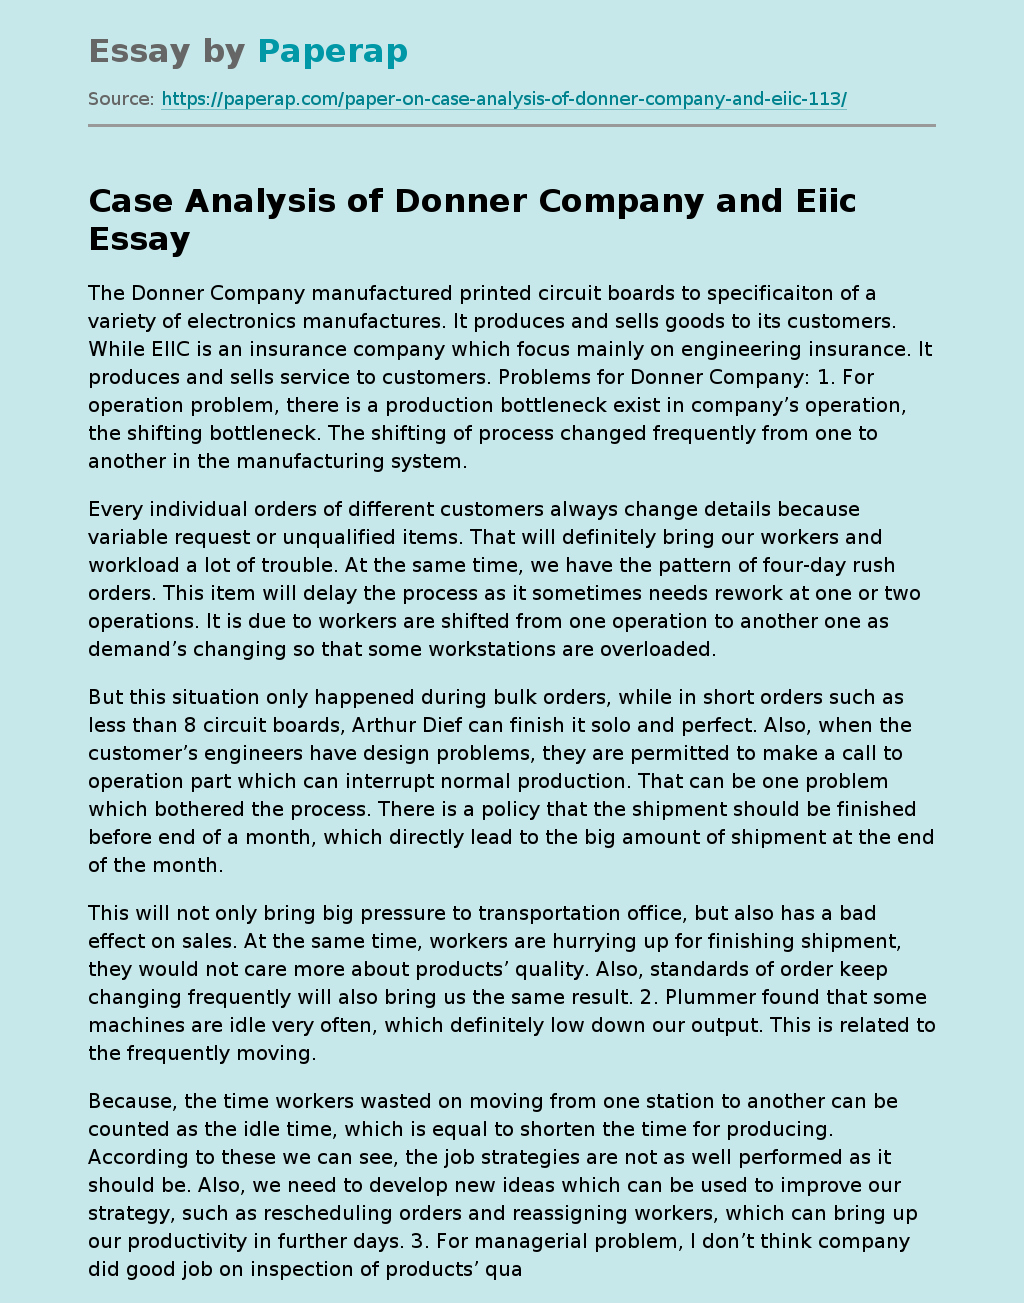 Case Analysis of Donner Company and Eiic